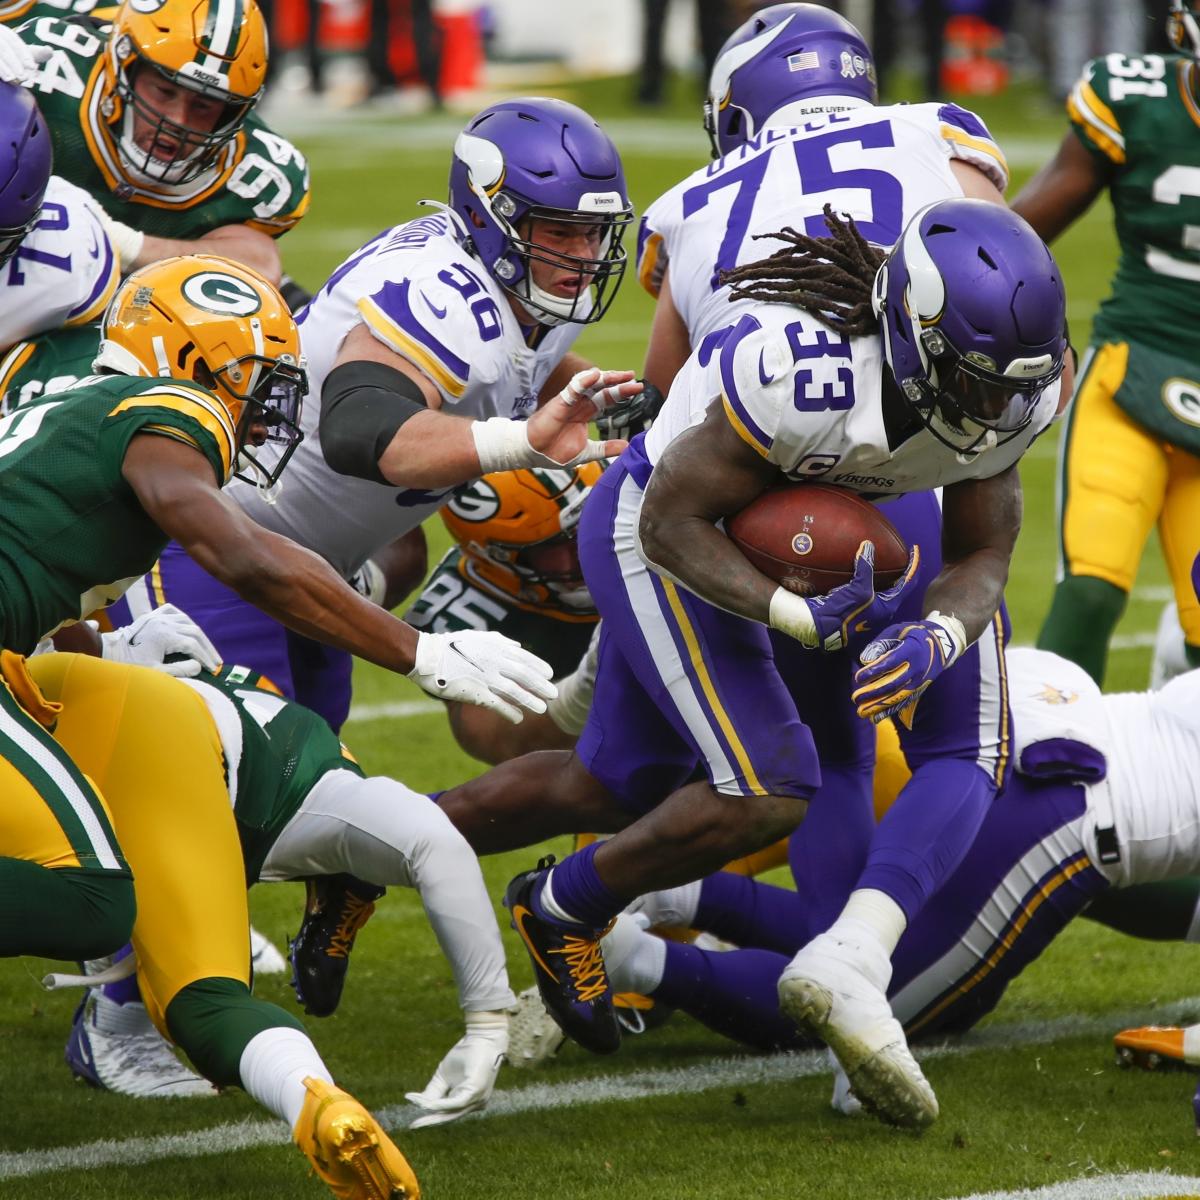 Yarn: Packers Player Examined Sure for COVID-19; GB to Protect Digital Conferences